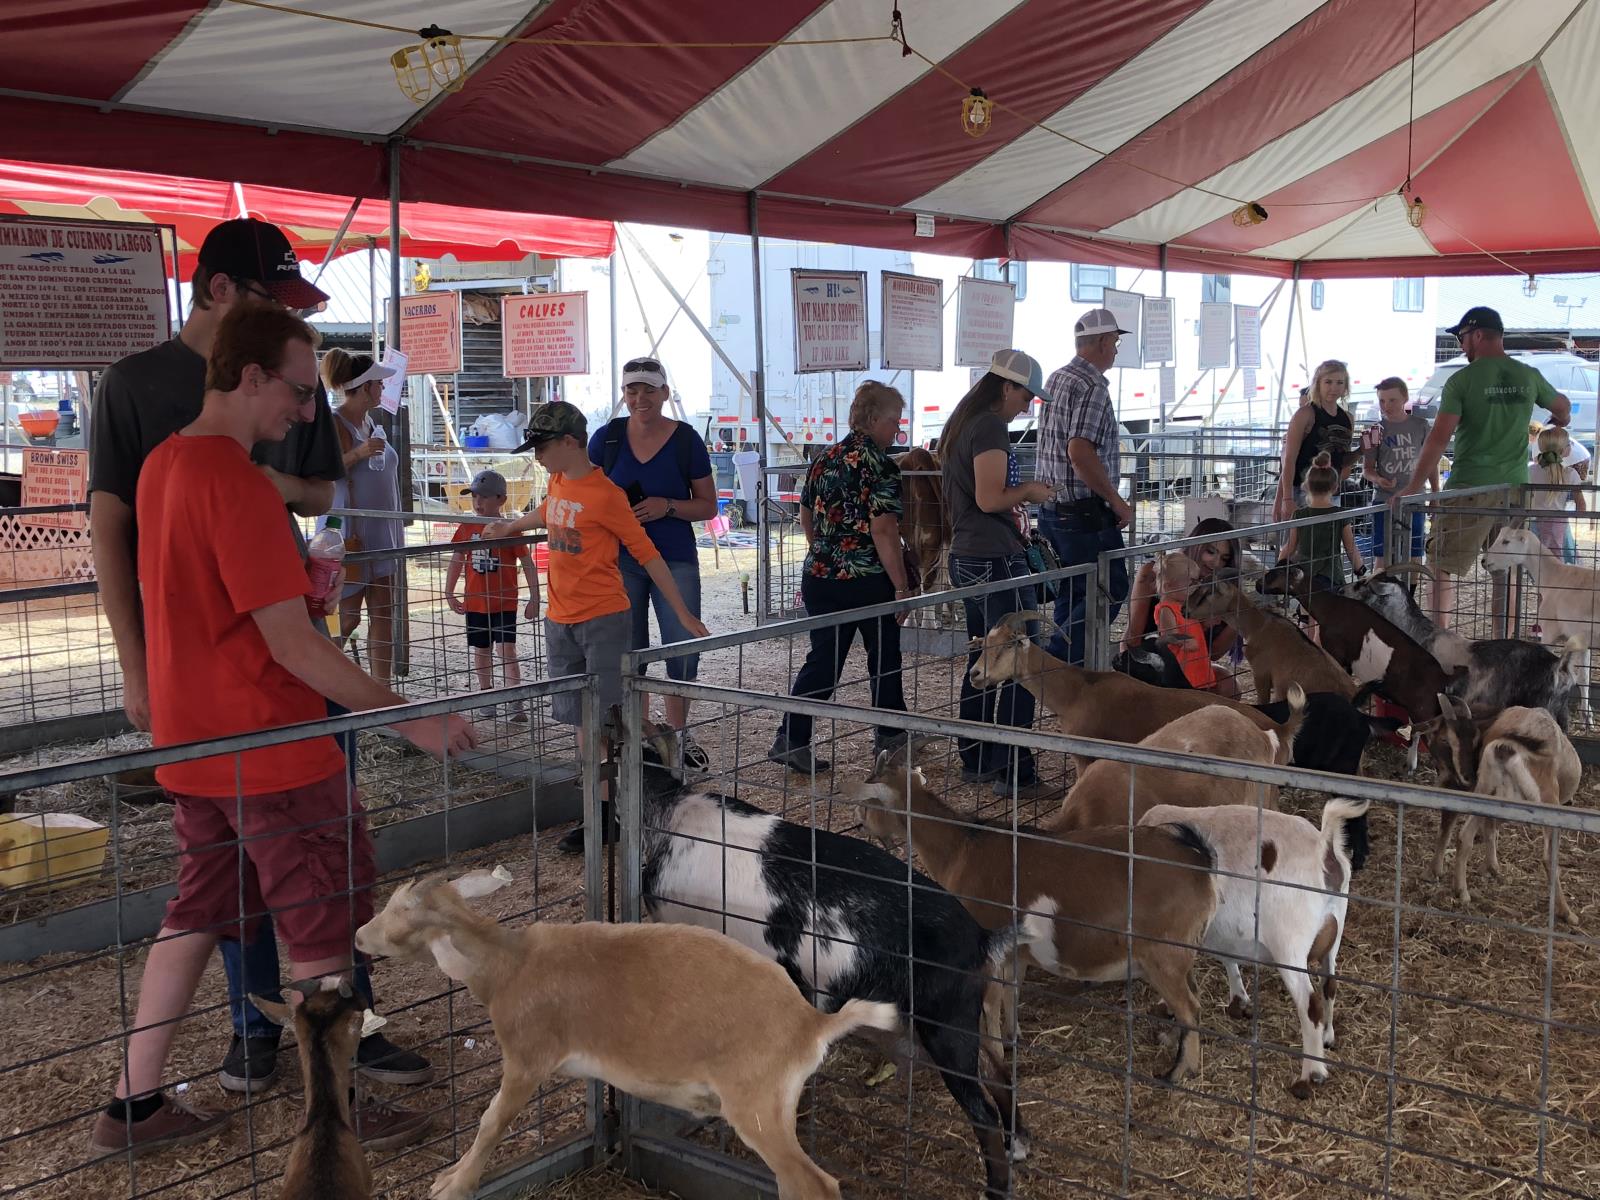 People visit a petting zoo during the recent Eastern Idaho State Fair in Blackfoot. Idaho Farm Bureau Federation helped sponsor the display, which used animals to help educate people about agriculture. 